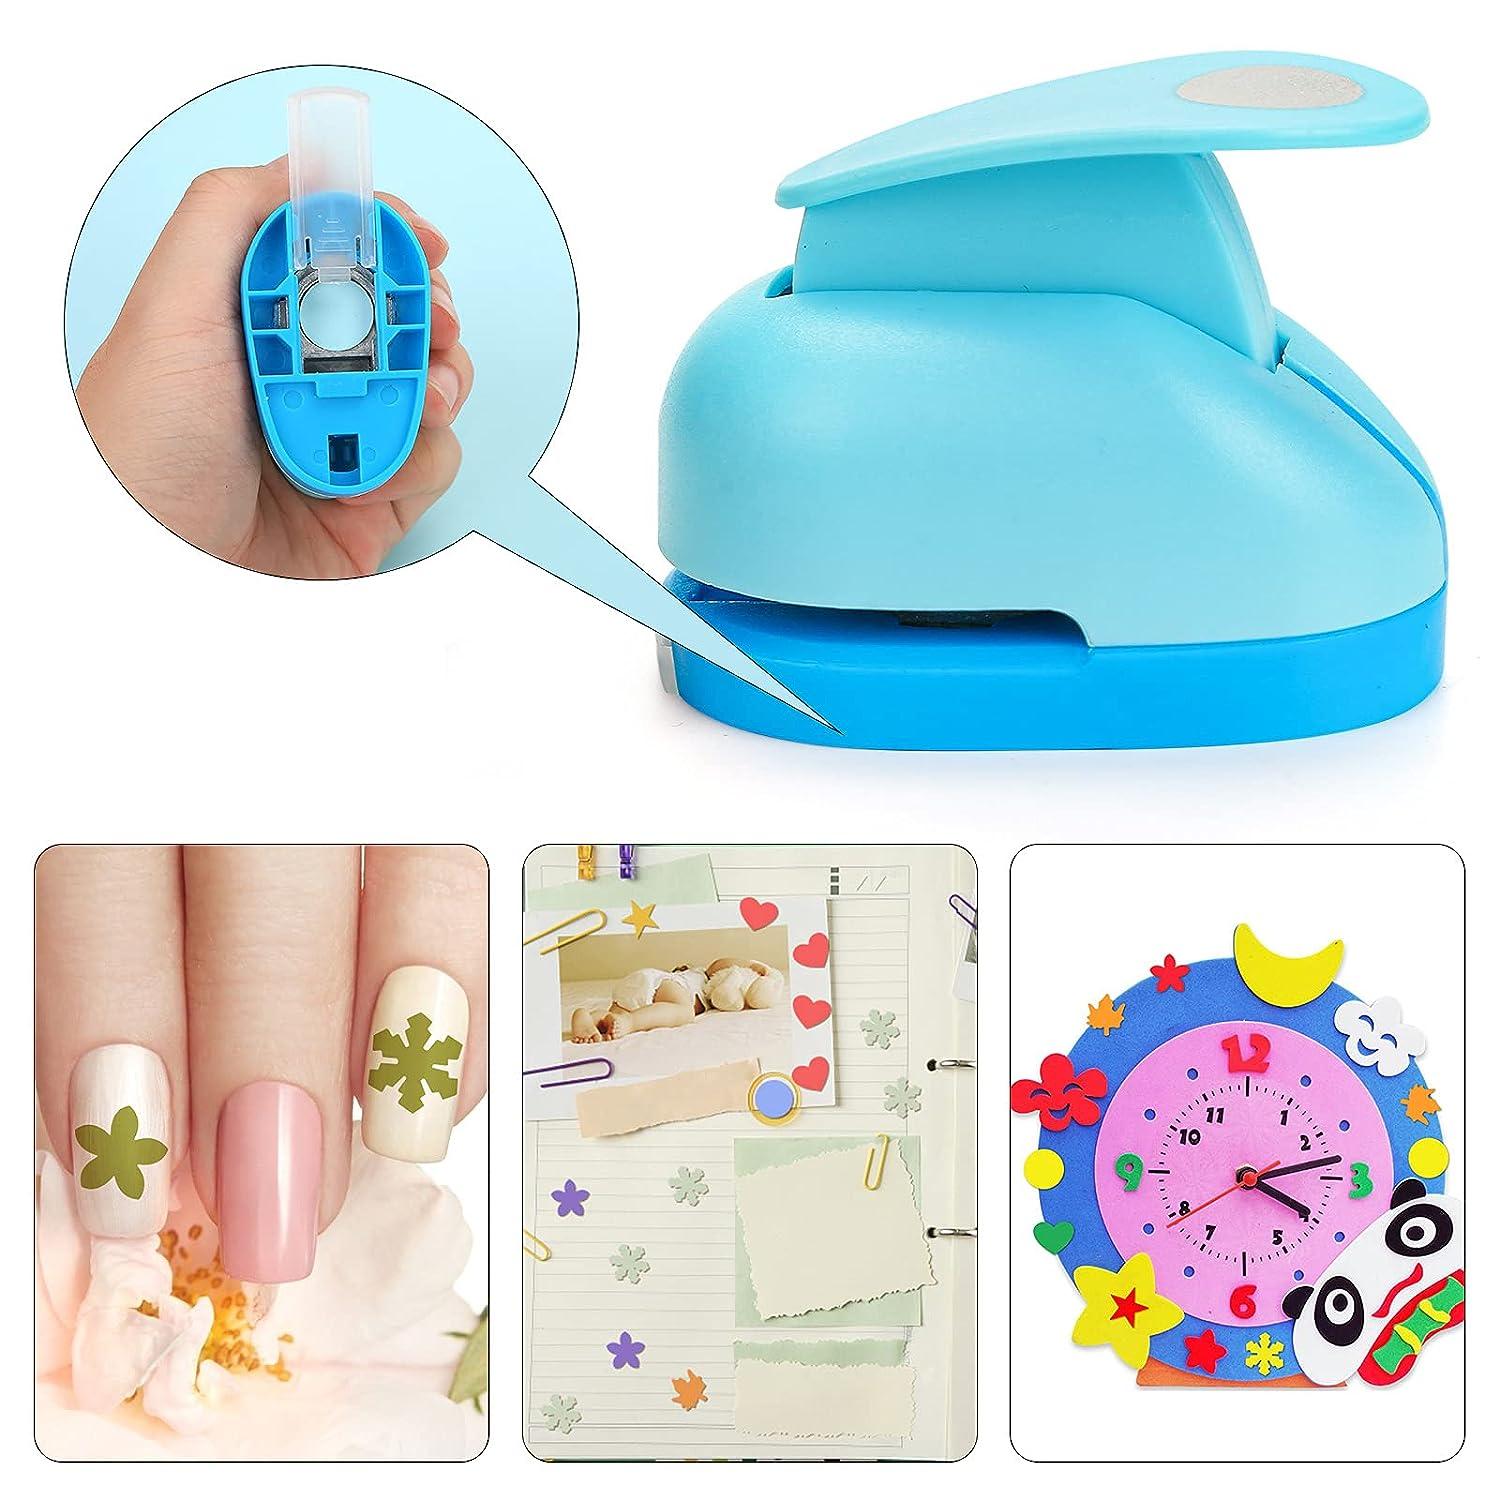  LOVEINUSA 12PCS Multicolor Toothpaste Clips and 10Pack Hole  Punch Shapes Craft Hole Punch : Arts, Crafts & Sewing